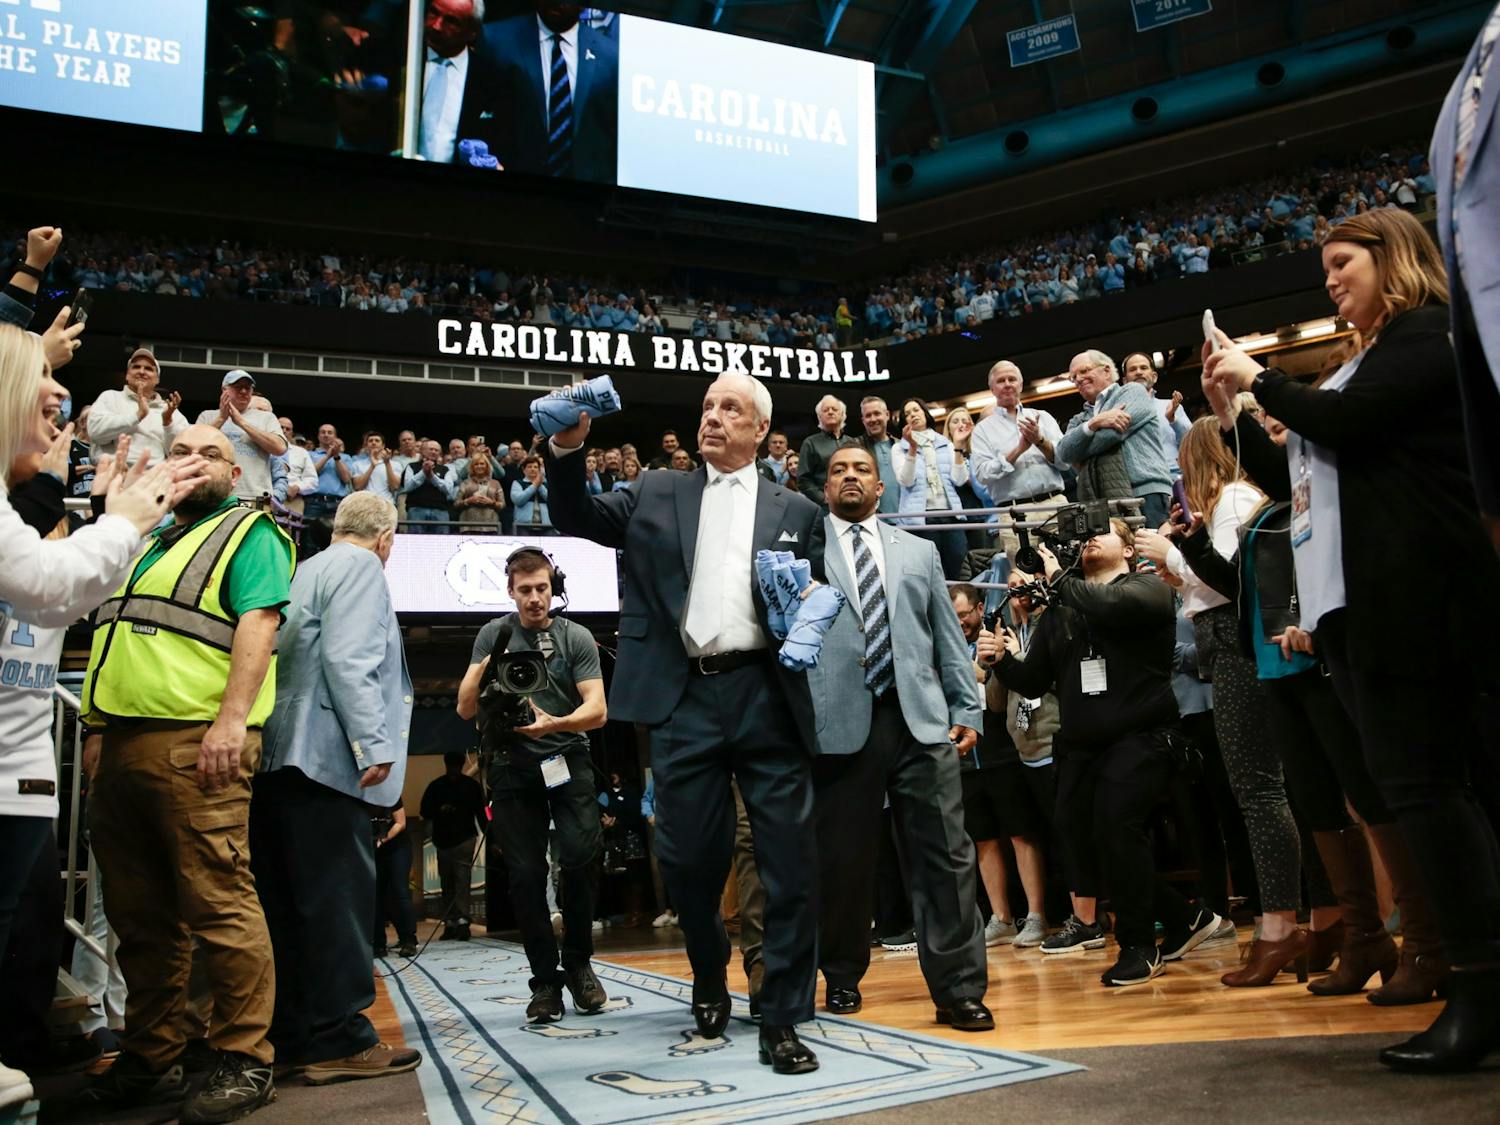 Head Coach Roy Williams prepares to toss t-shirts into the crowd ahead of a game against Duke in the Smith Center on Saturday, Feb. 8, 2020. The Tar Heels lost to the Blue Devils 98-96.